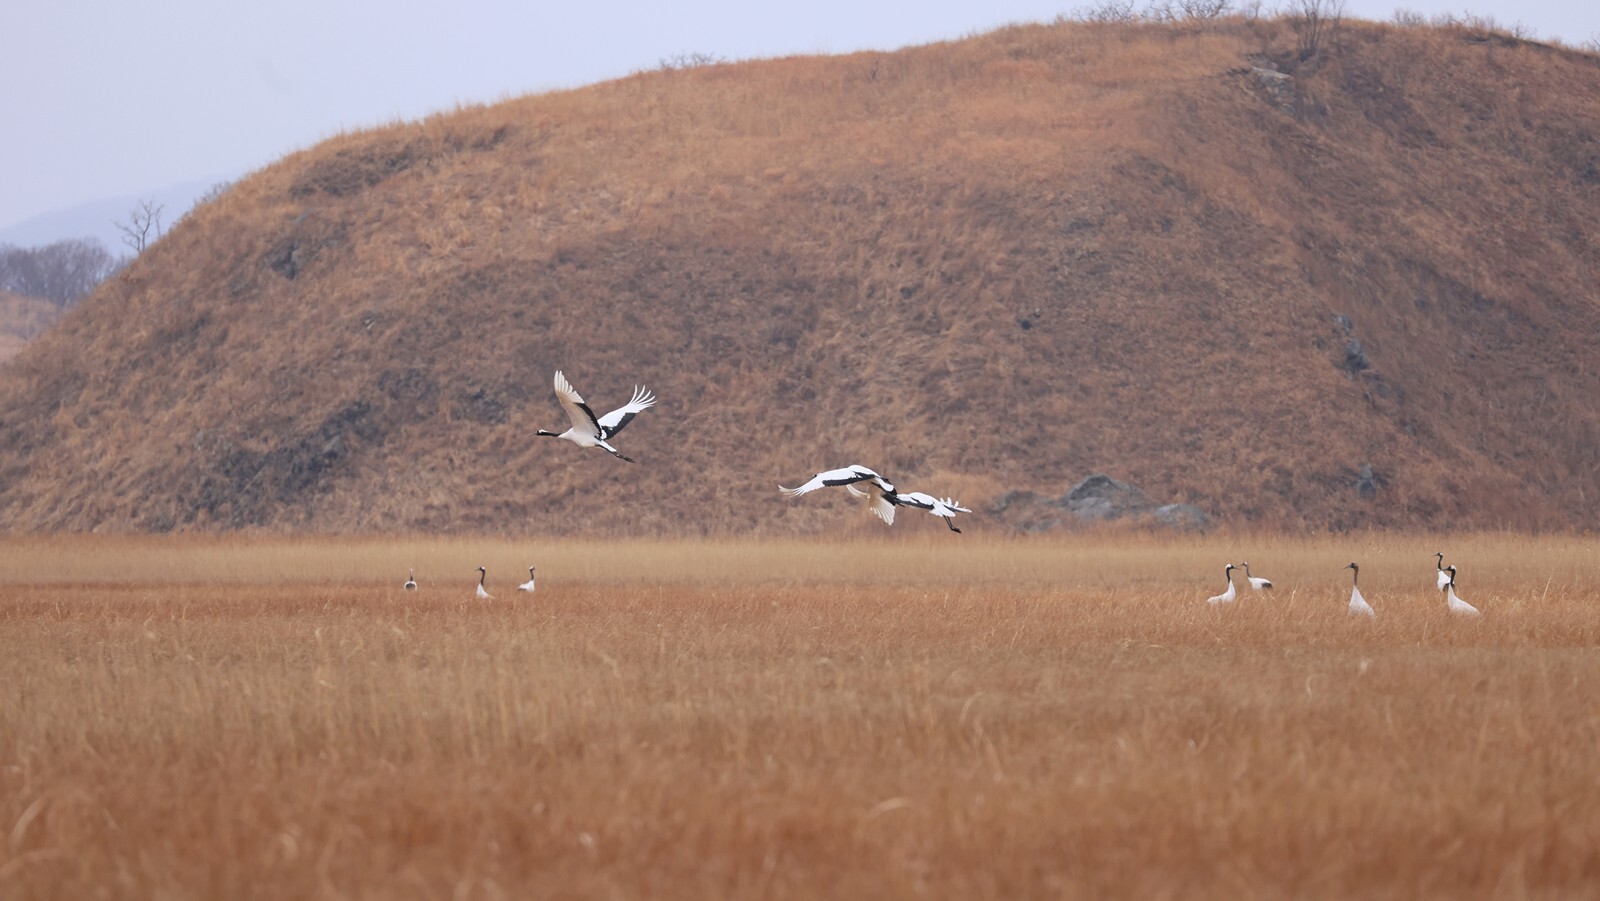 In Primorye, cranes were counted during the spring migration - Cranes, Birds, Wild animals, Primorsky Krai, Interesting, WWF, Informative, Positive, Ornithology, Video, Longpost